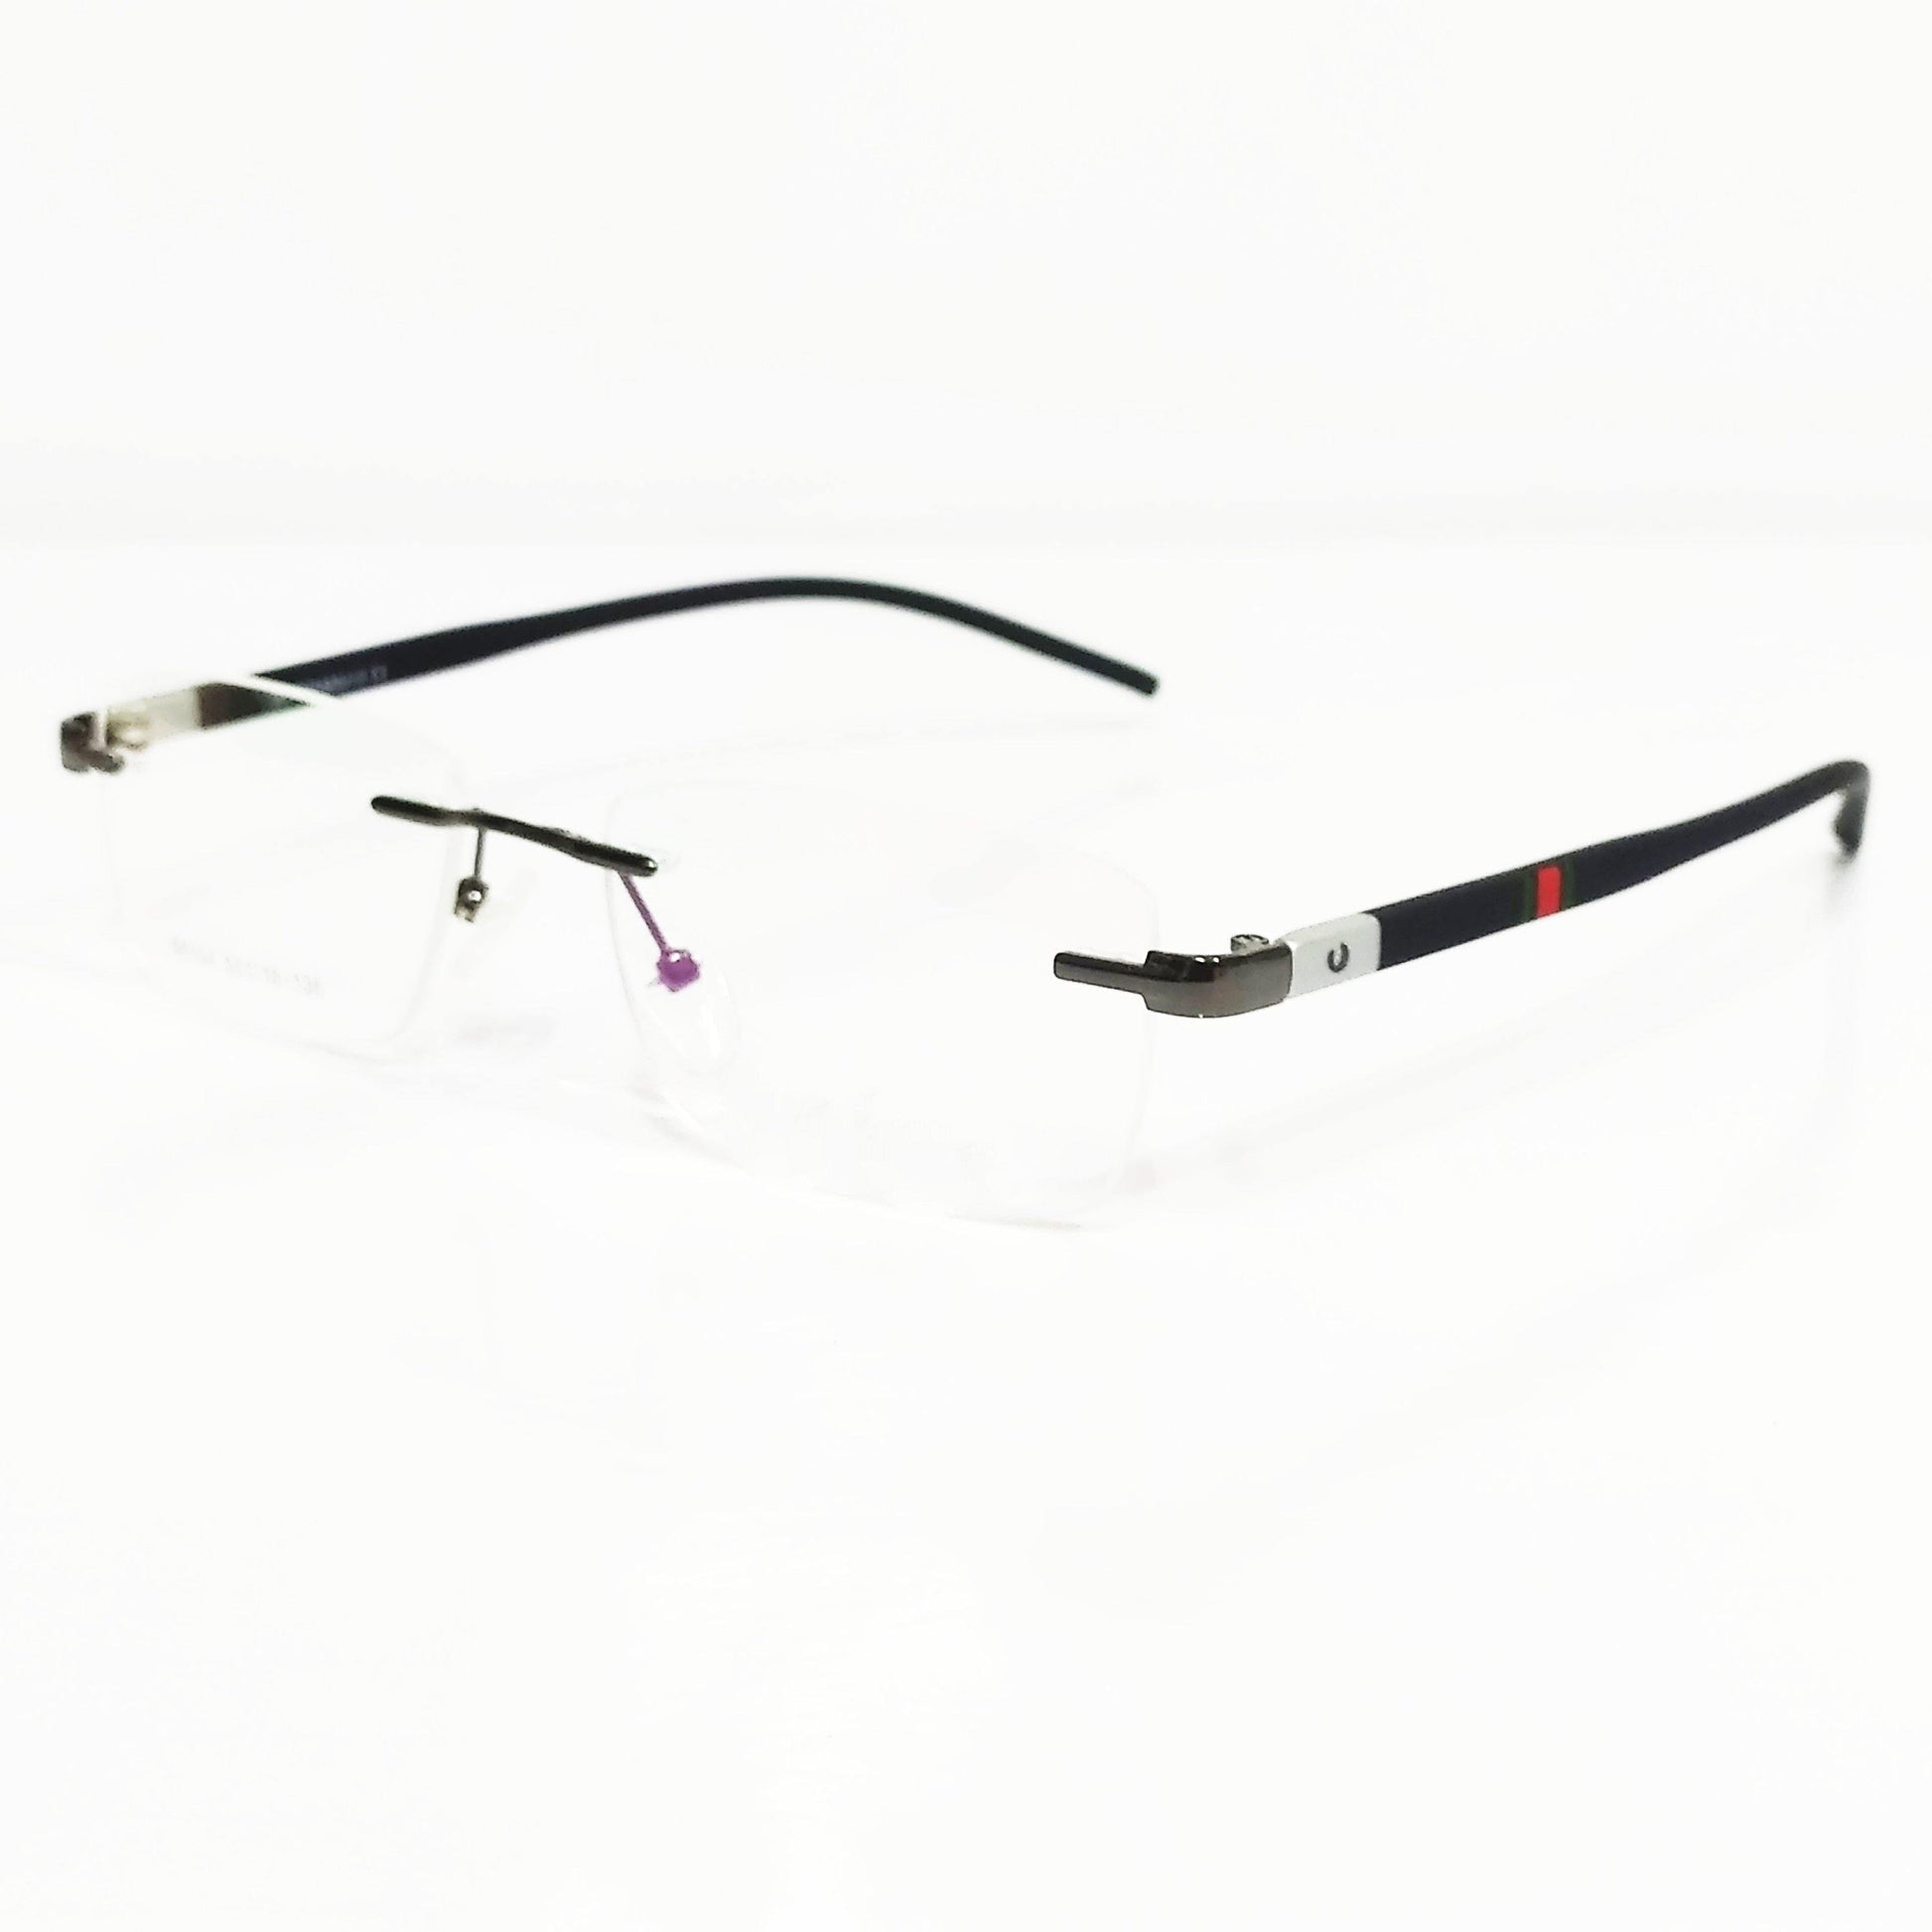 Buy Grey Black Rimless Spectacle Frame Glasses - Glasses India Online in India